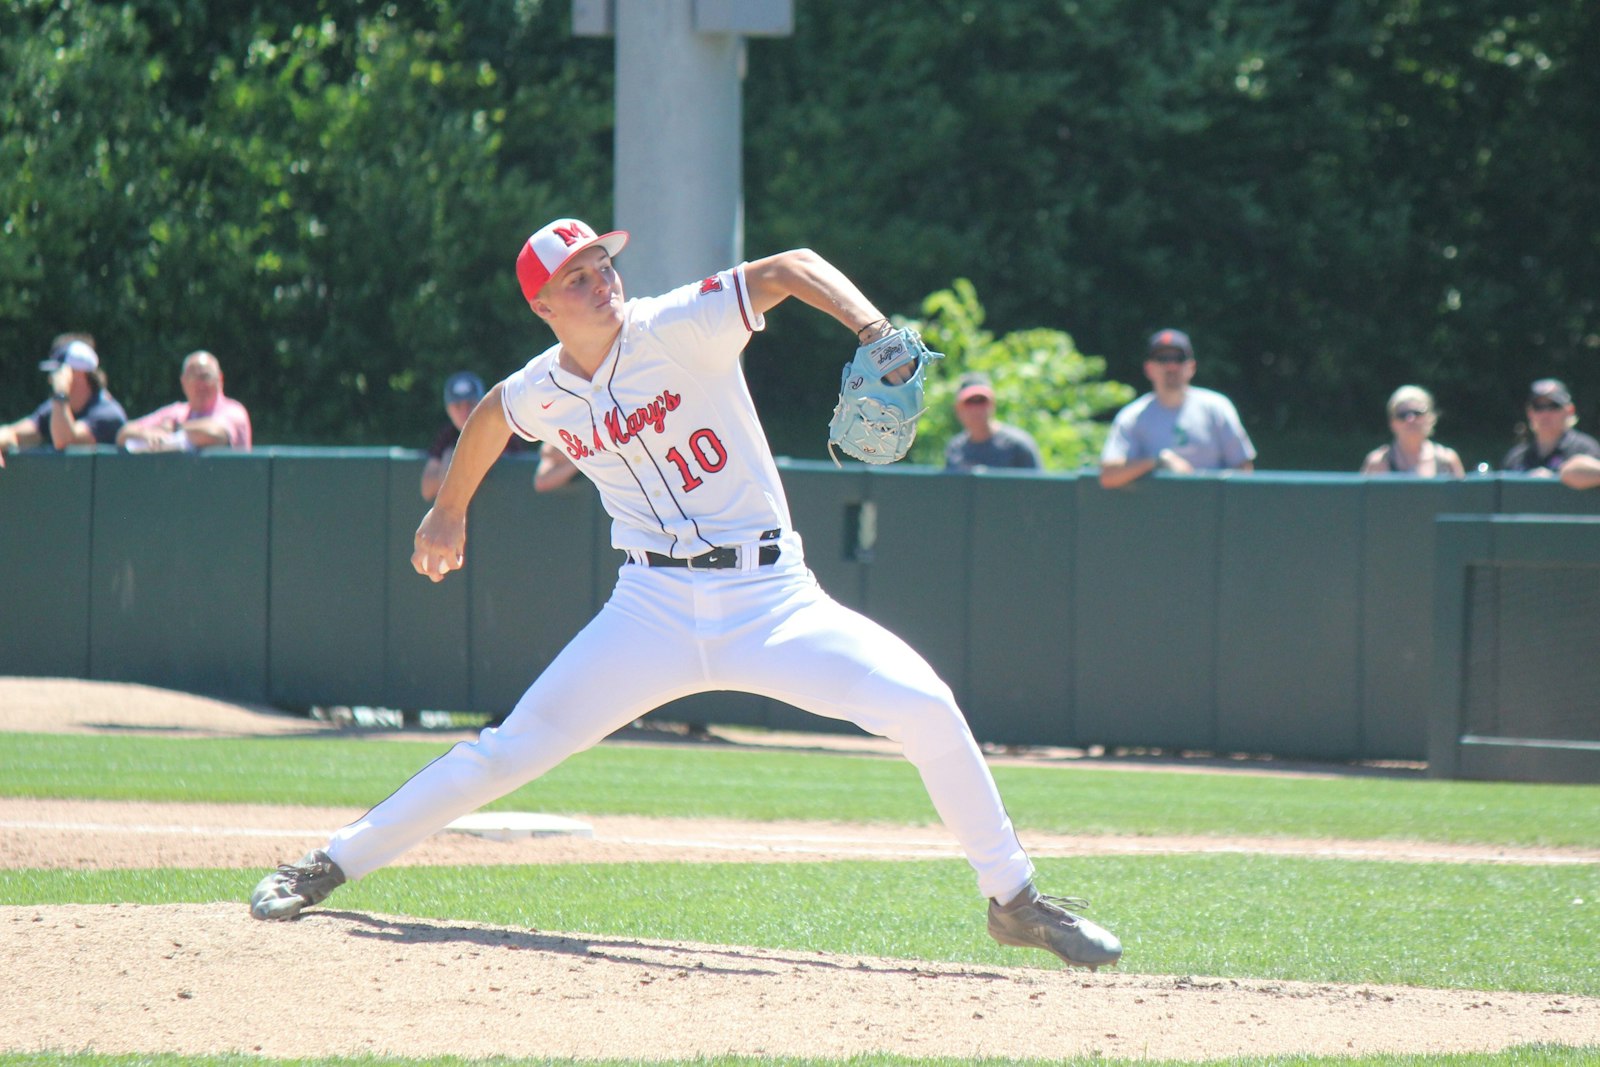 Firing a fastball toward the strike zone, Brock Porter was Orchard Lake St. Mary’s ace as the Eaglets put up a 44-0 record and a MHSAA Division 1 state championship this season.